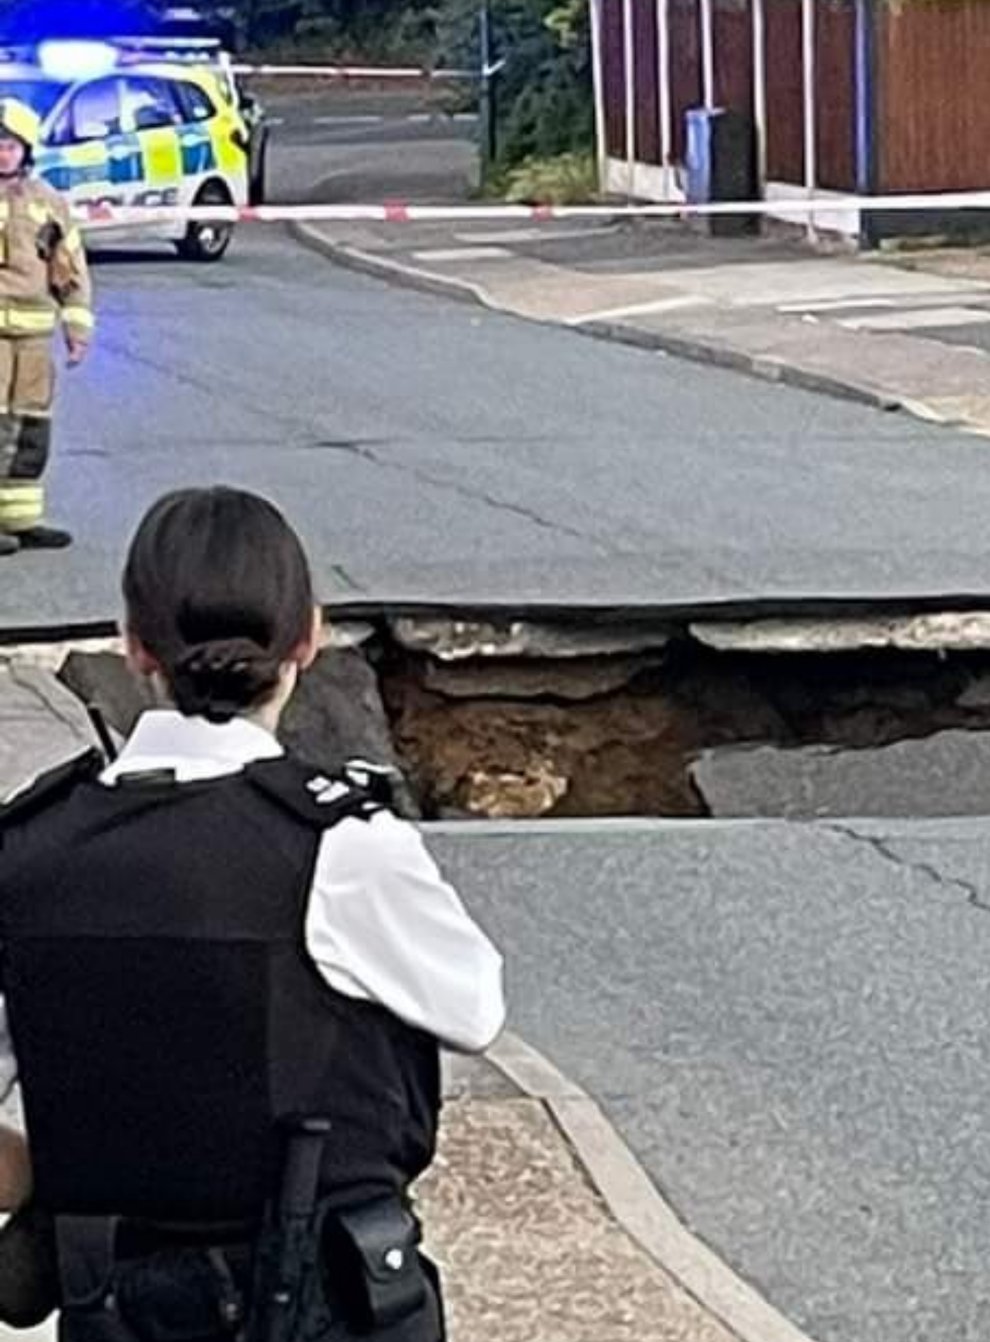 Liam Edwards, who lives on Leysdown Avenue, said he heard a massive thud as part of the road next to his collapsed (Liam Edwards/PA)